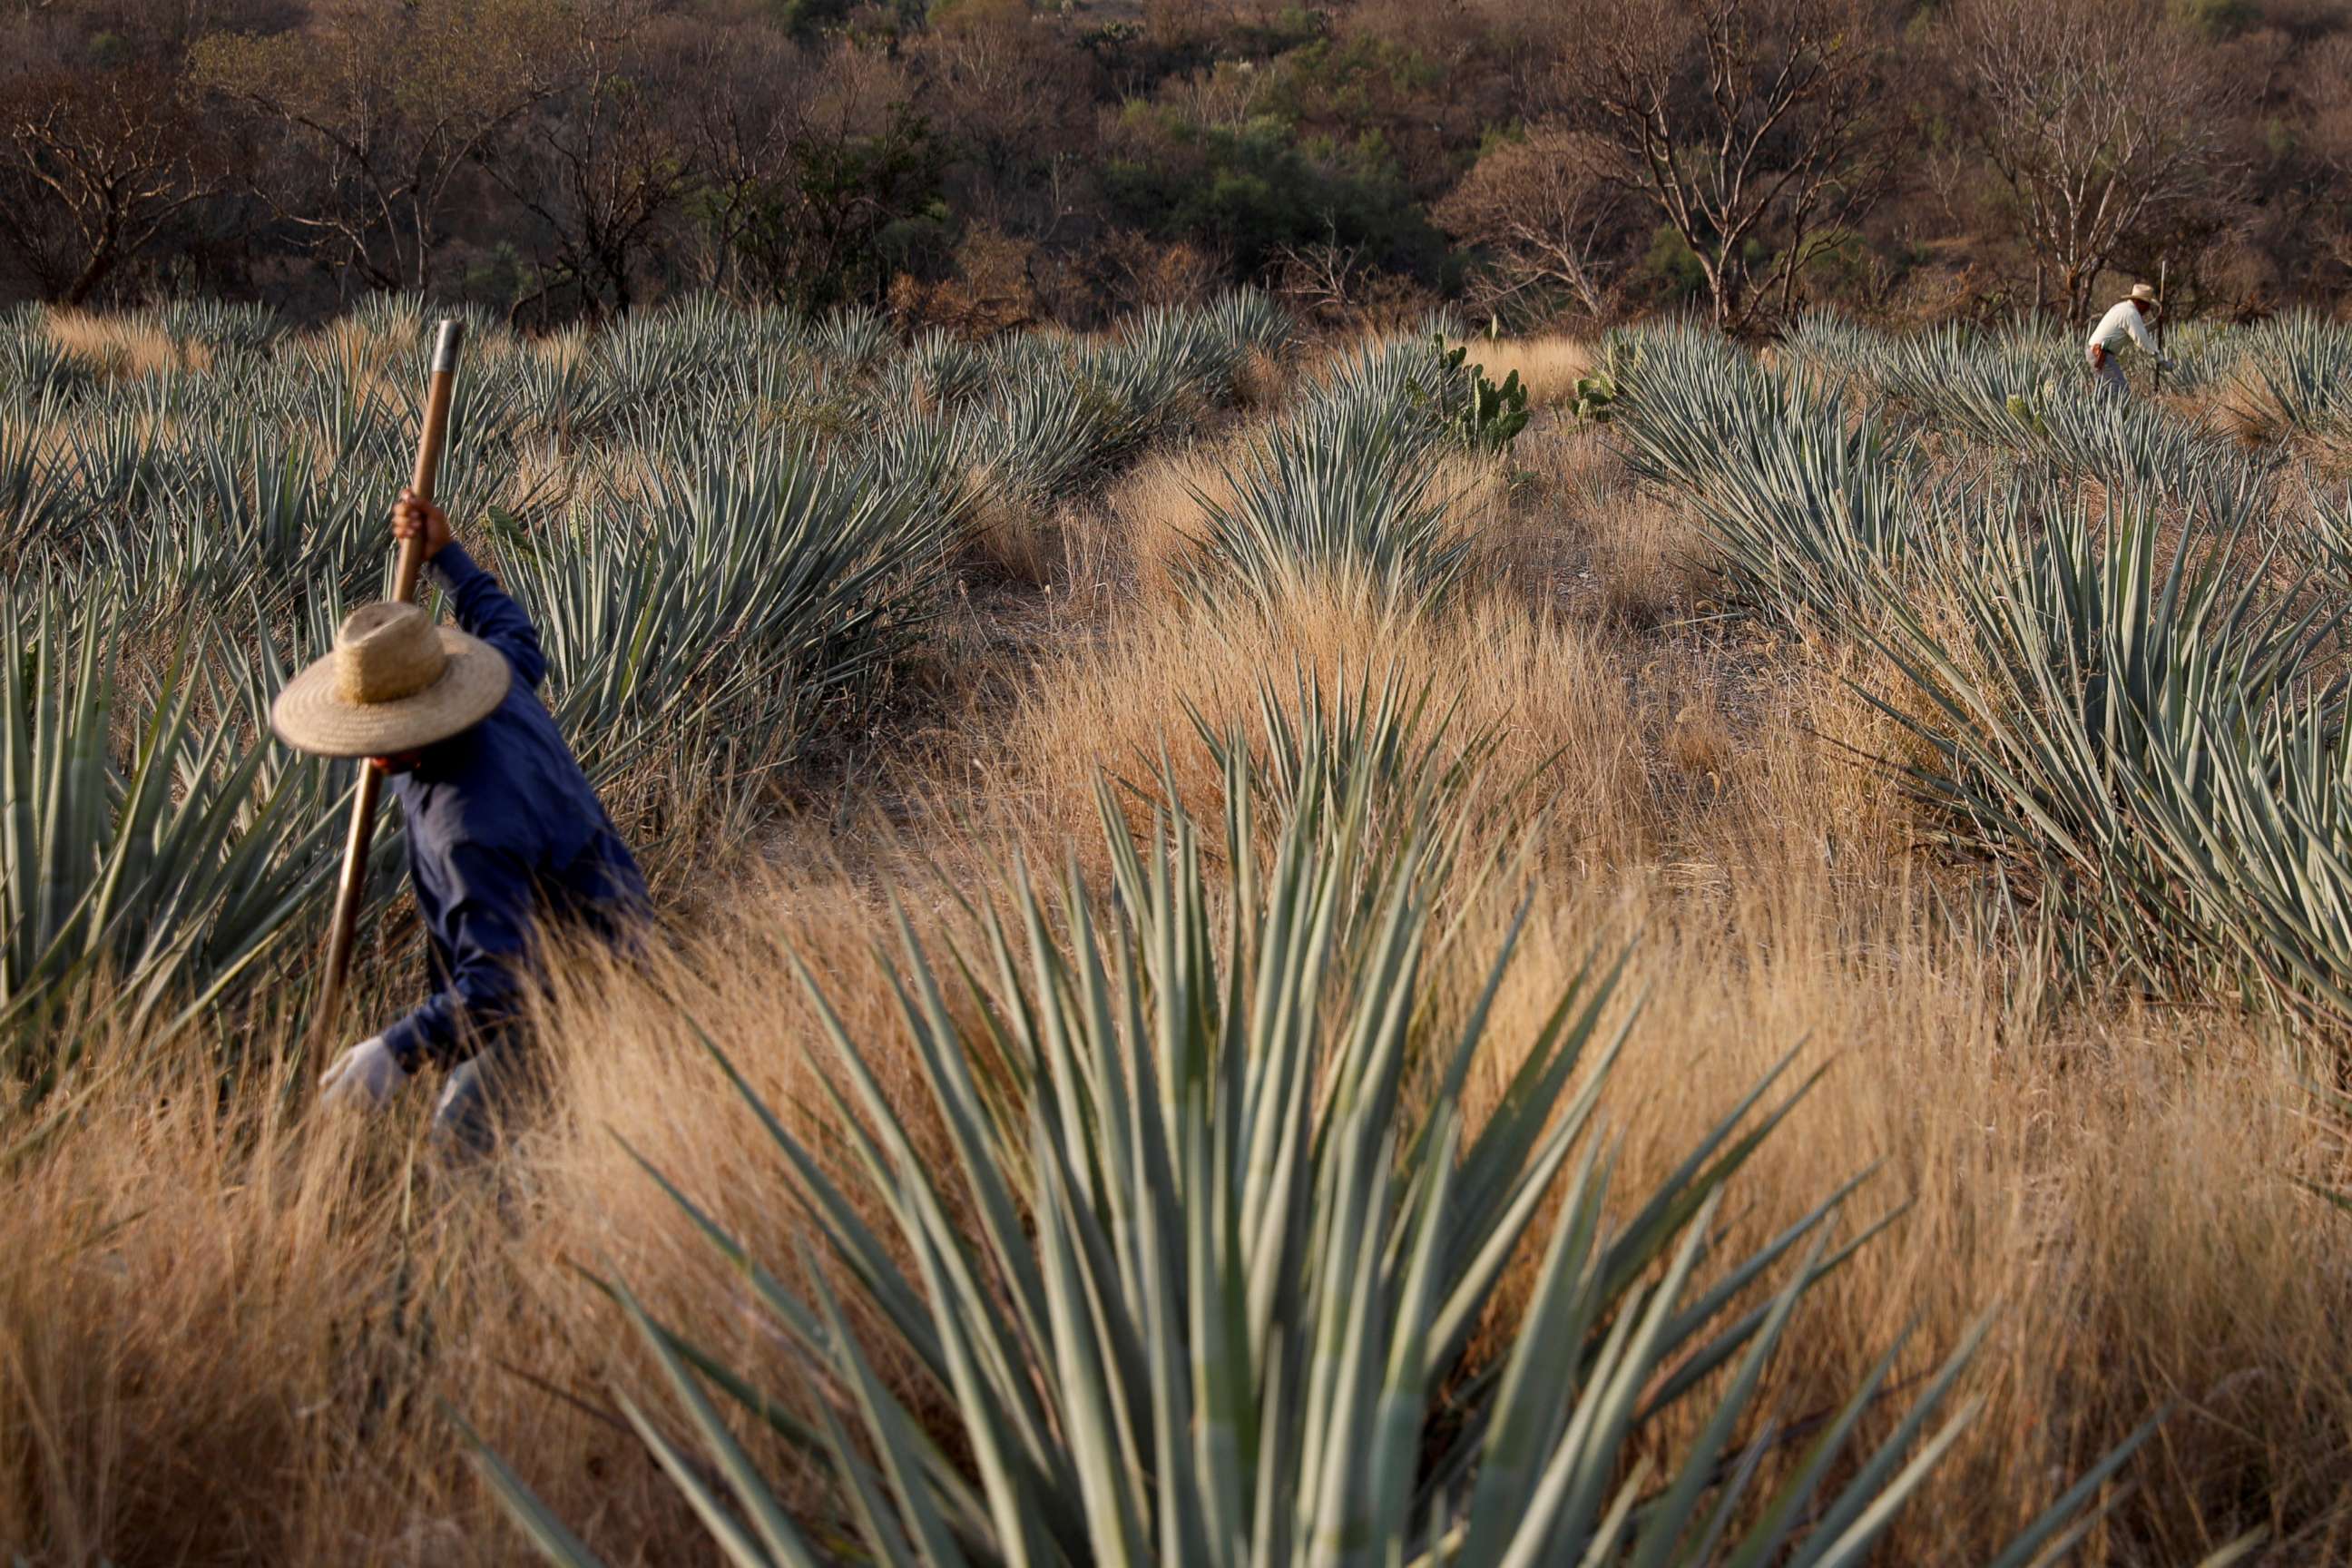 PHOTO: A farmer, also known as a jimador, clears the area surrounding blue agave before it is harvested in Tepatitlan, Jalisco, Mexico, April 10, 2018. 